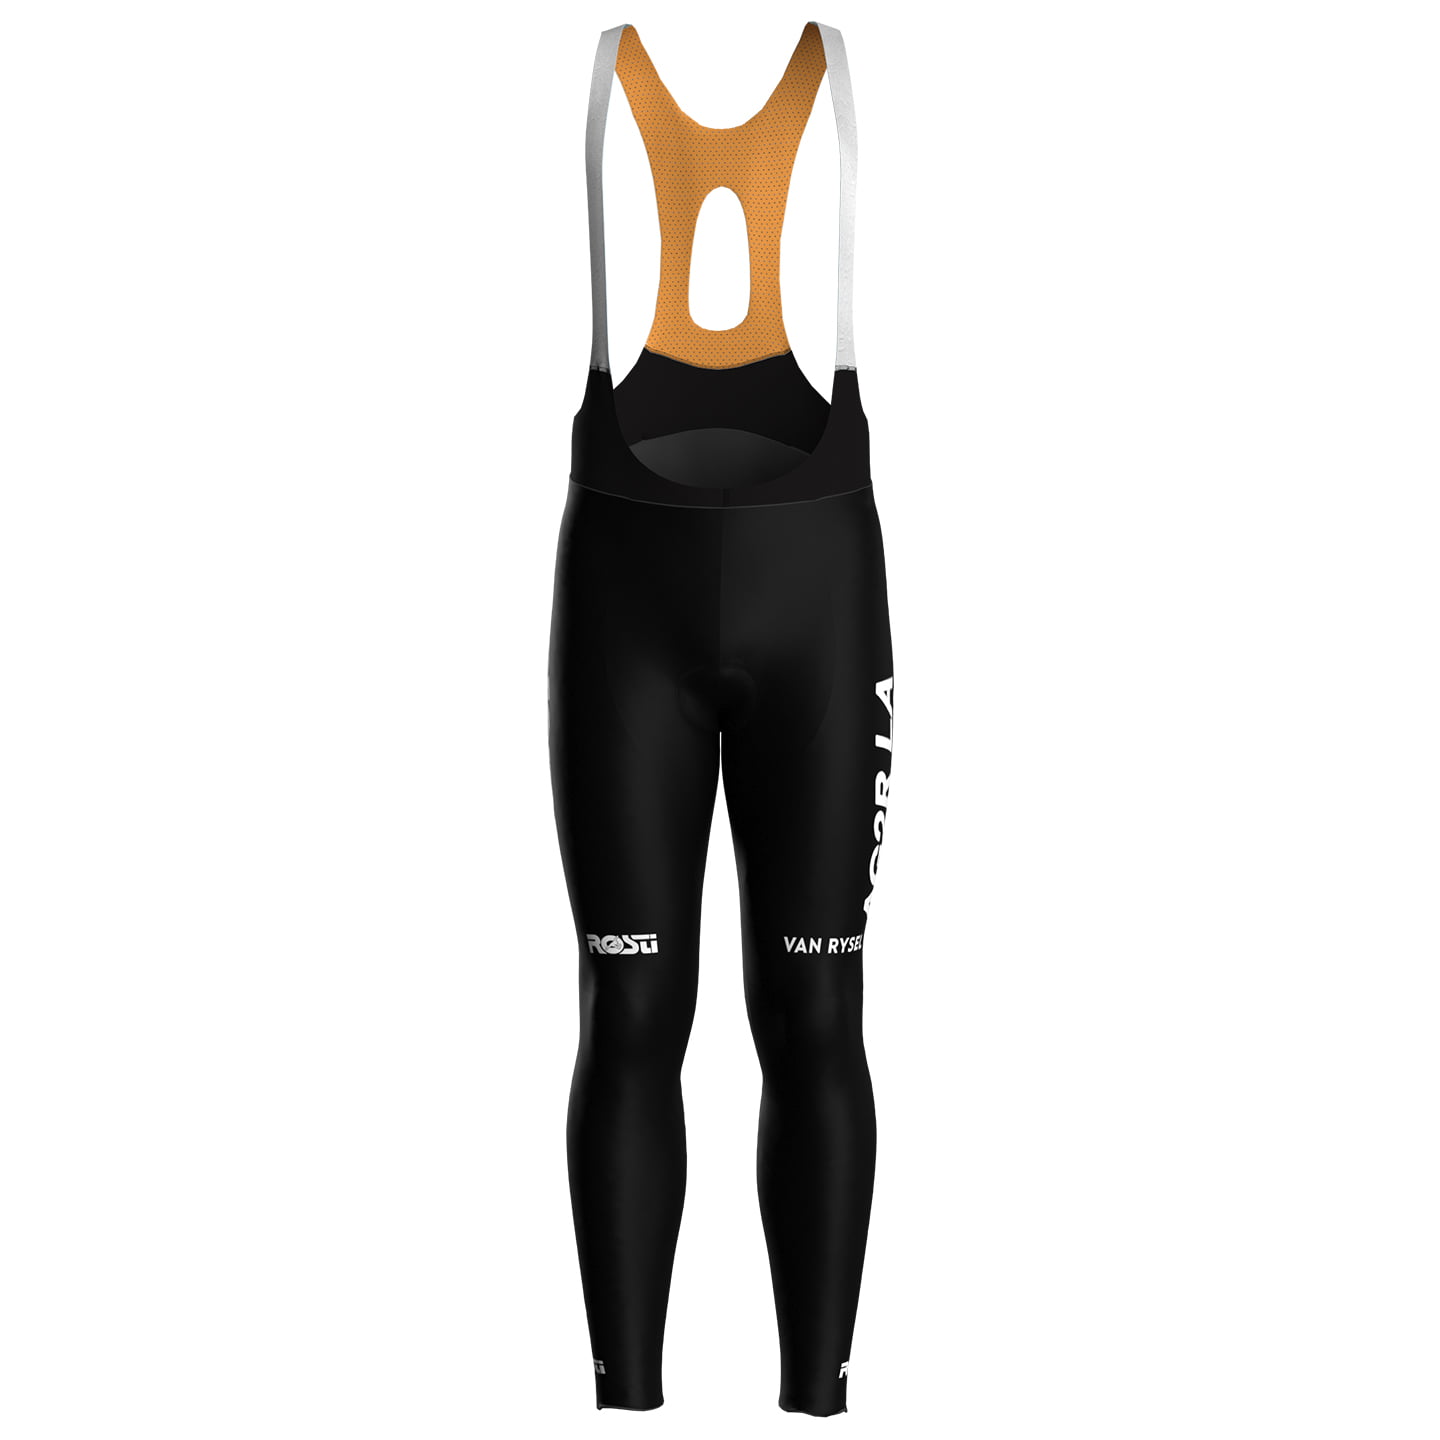 DECATHLON AG2R LA MONDIALE 2024 Bib Tights, for men, size XL, Cycle trousers, Cycle clothing